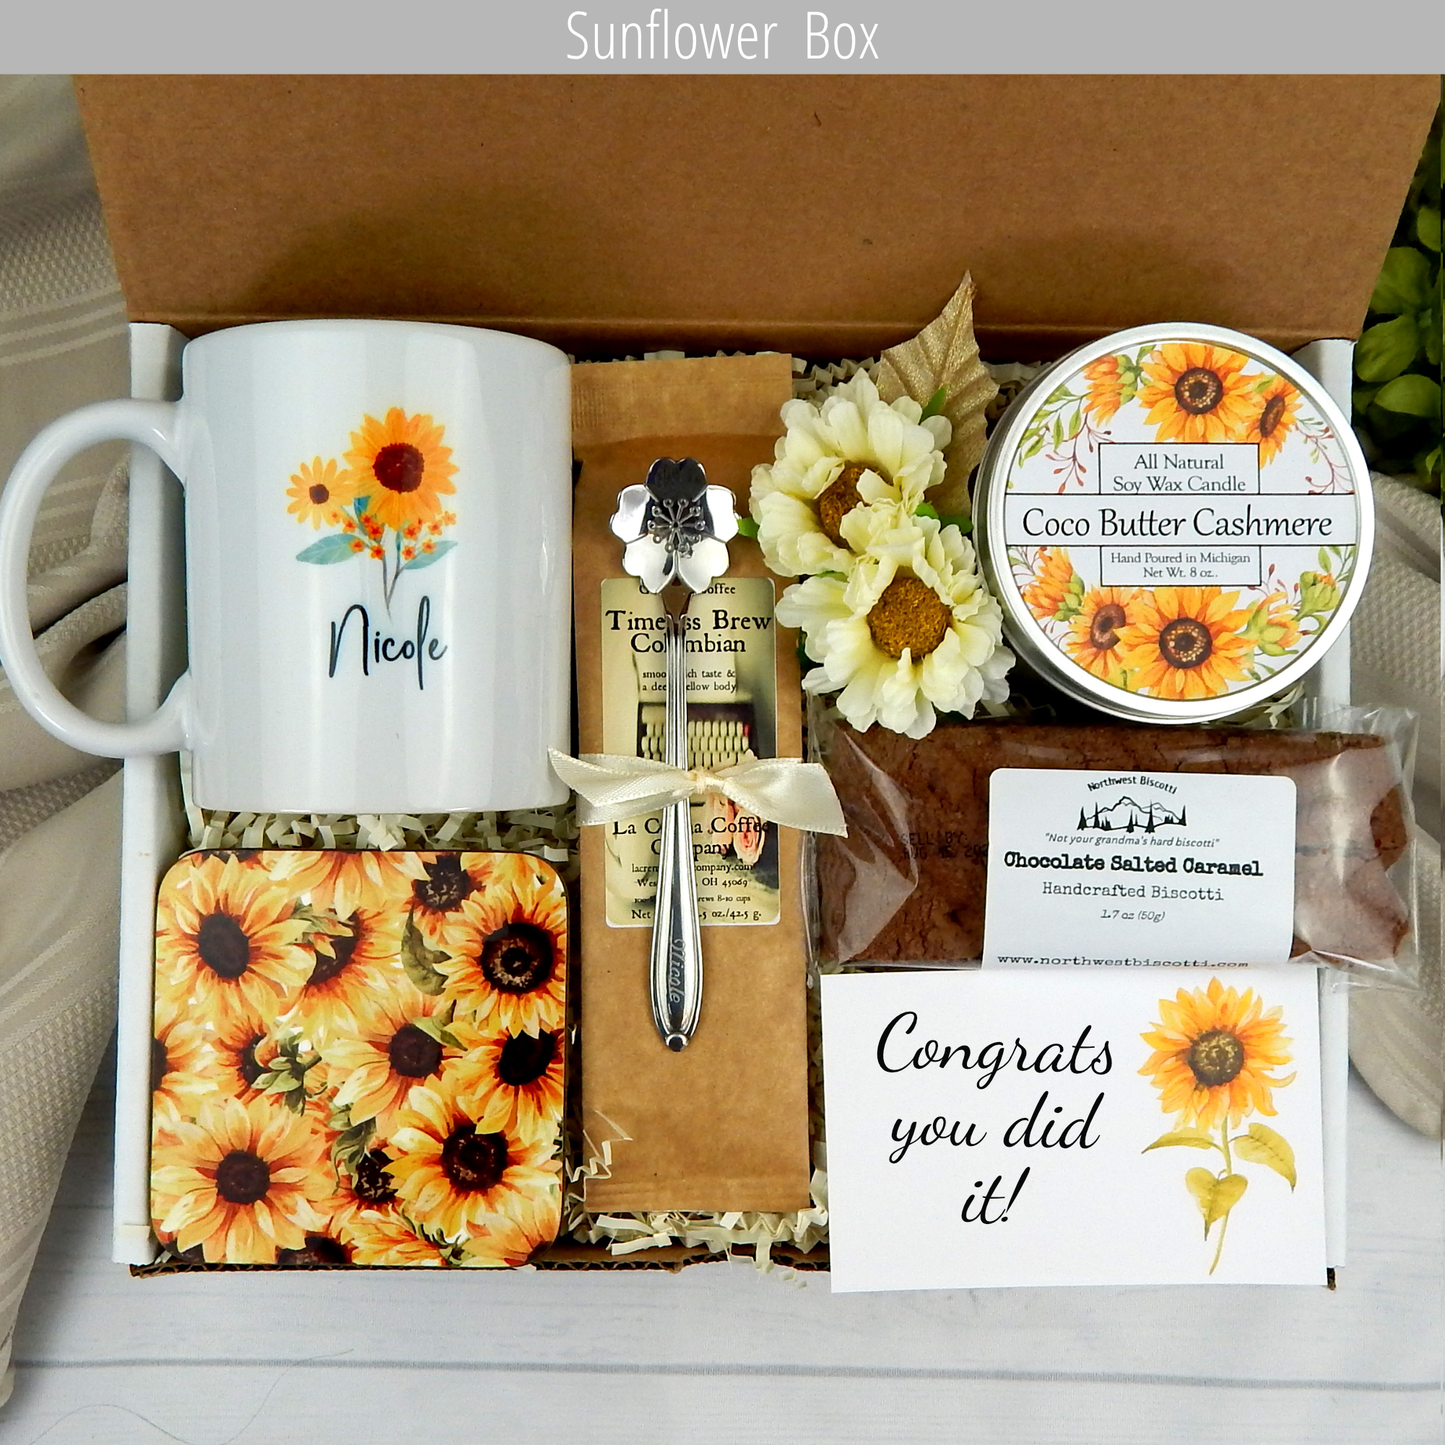 Sunflower congratulations gift: For various achievements, with custom name mug, candle, engraved spoon, biscotti, and coffee.